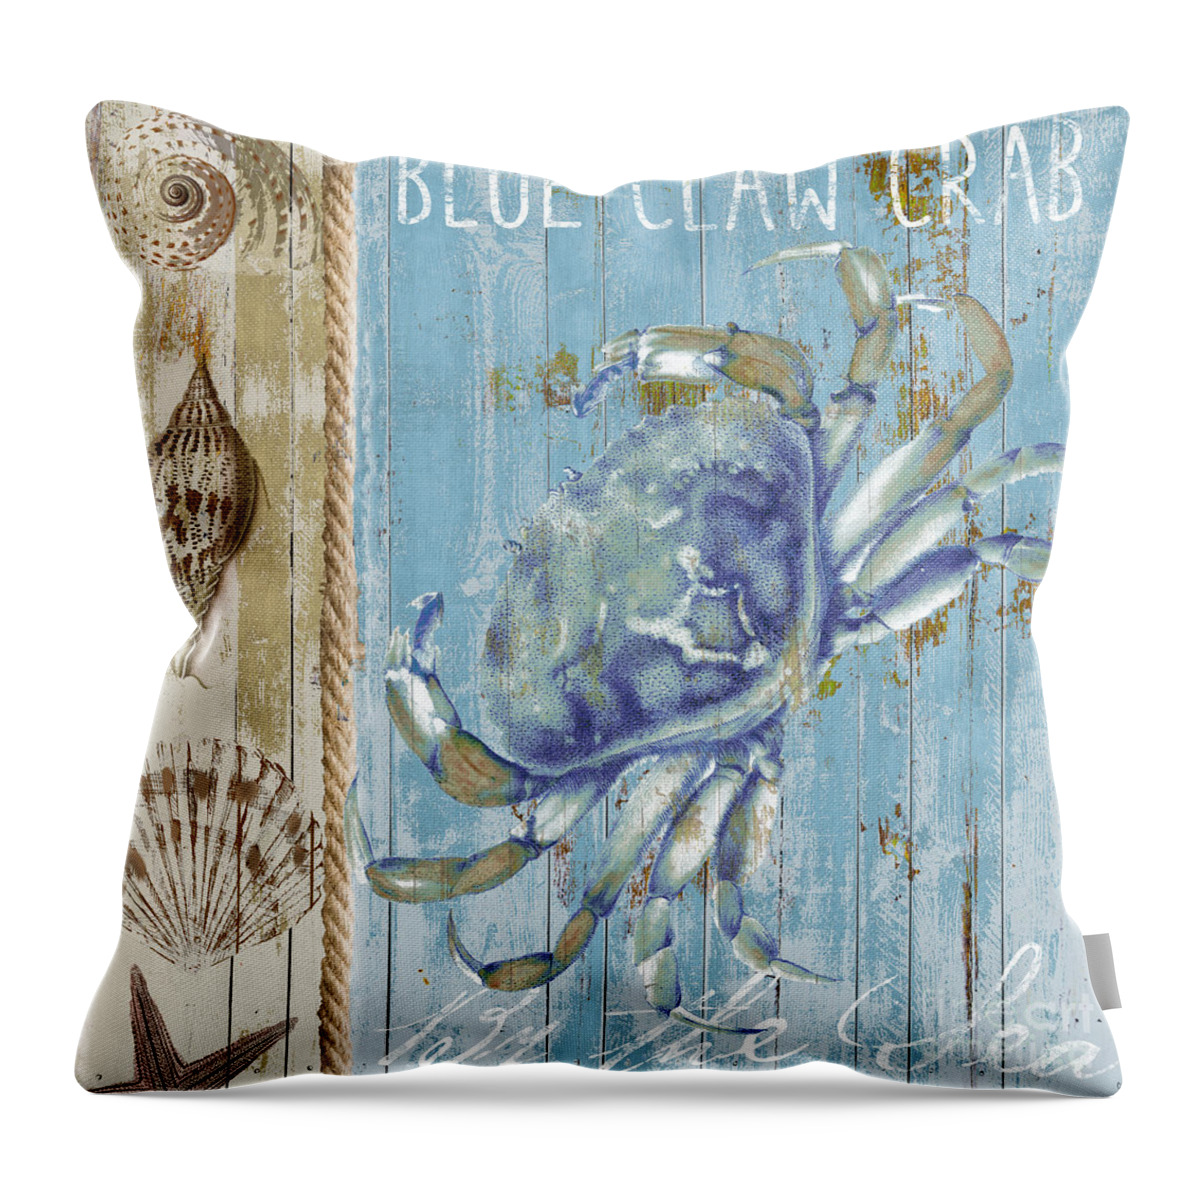 Abstract Throw Pillow featuring the painting Blue Claw Crab by Mindy Sommers